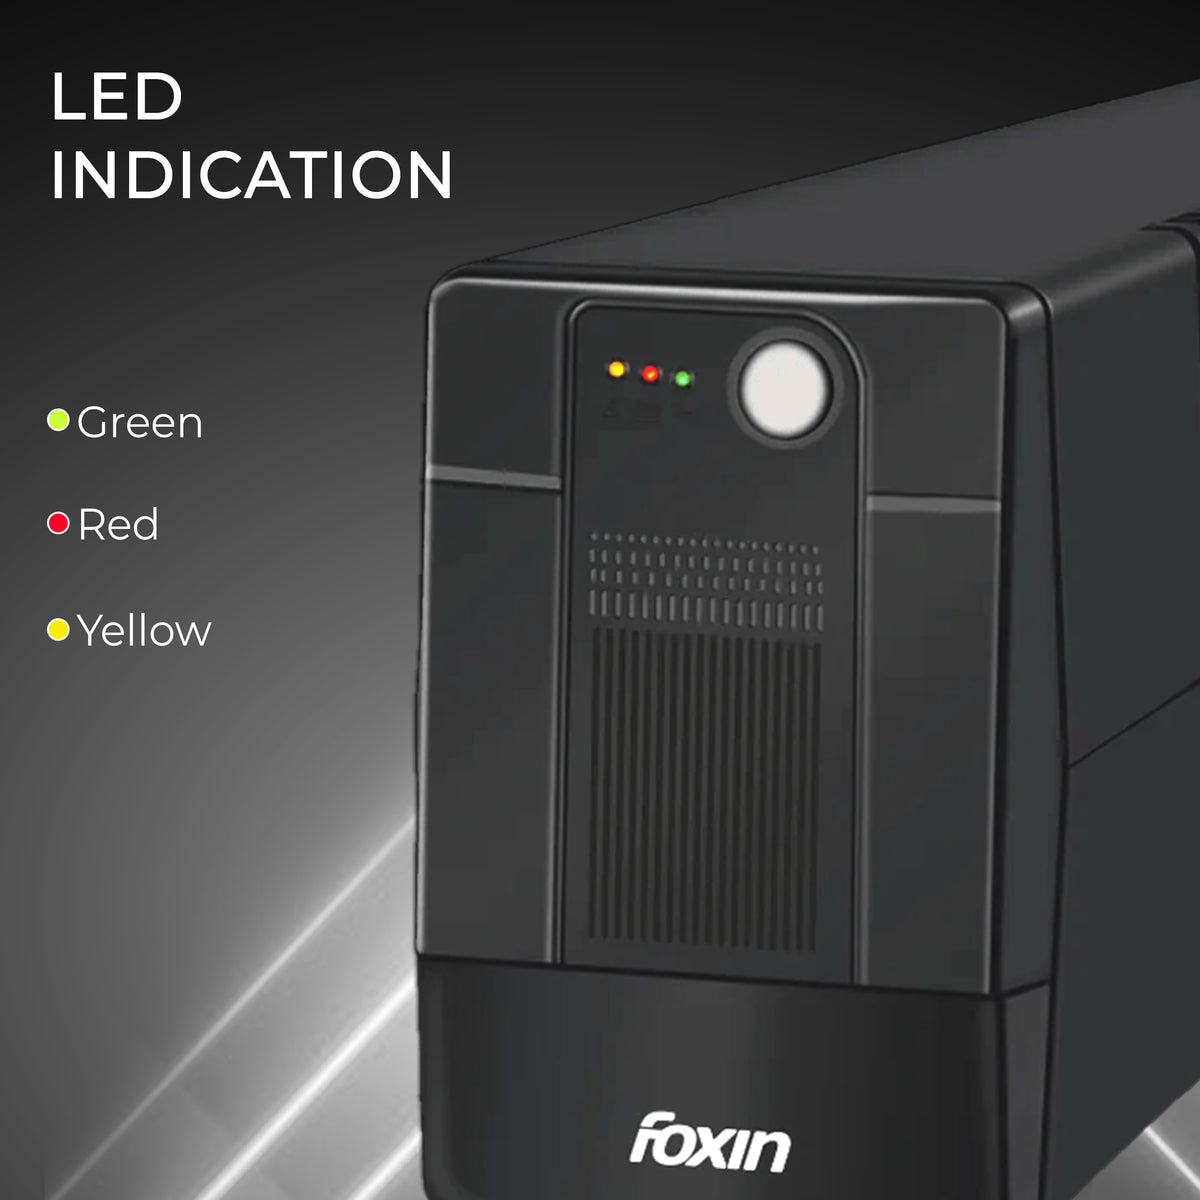 Foxin FPS-1001 Uninterrupted Power Supply (UPS), with 1000VA/360Watt Cold-Start Functionality | For Desktop Computers, Laptops and Wifi Routers